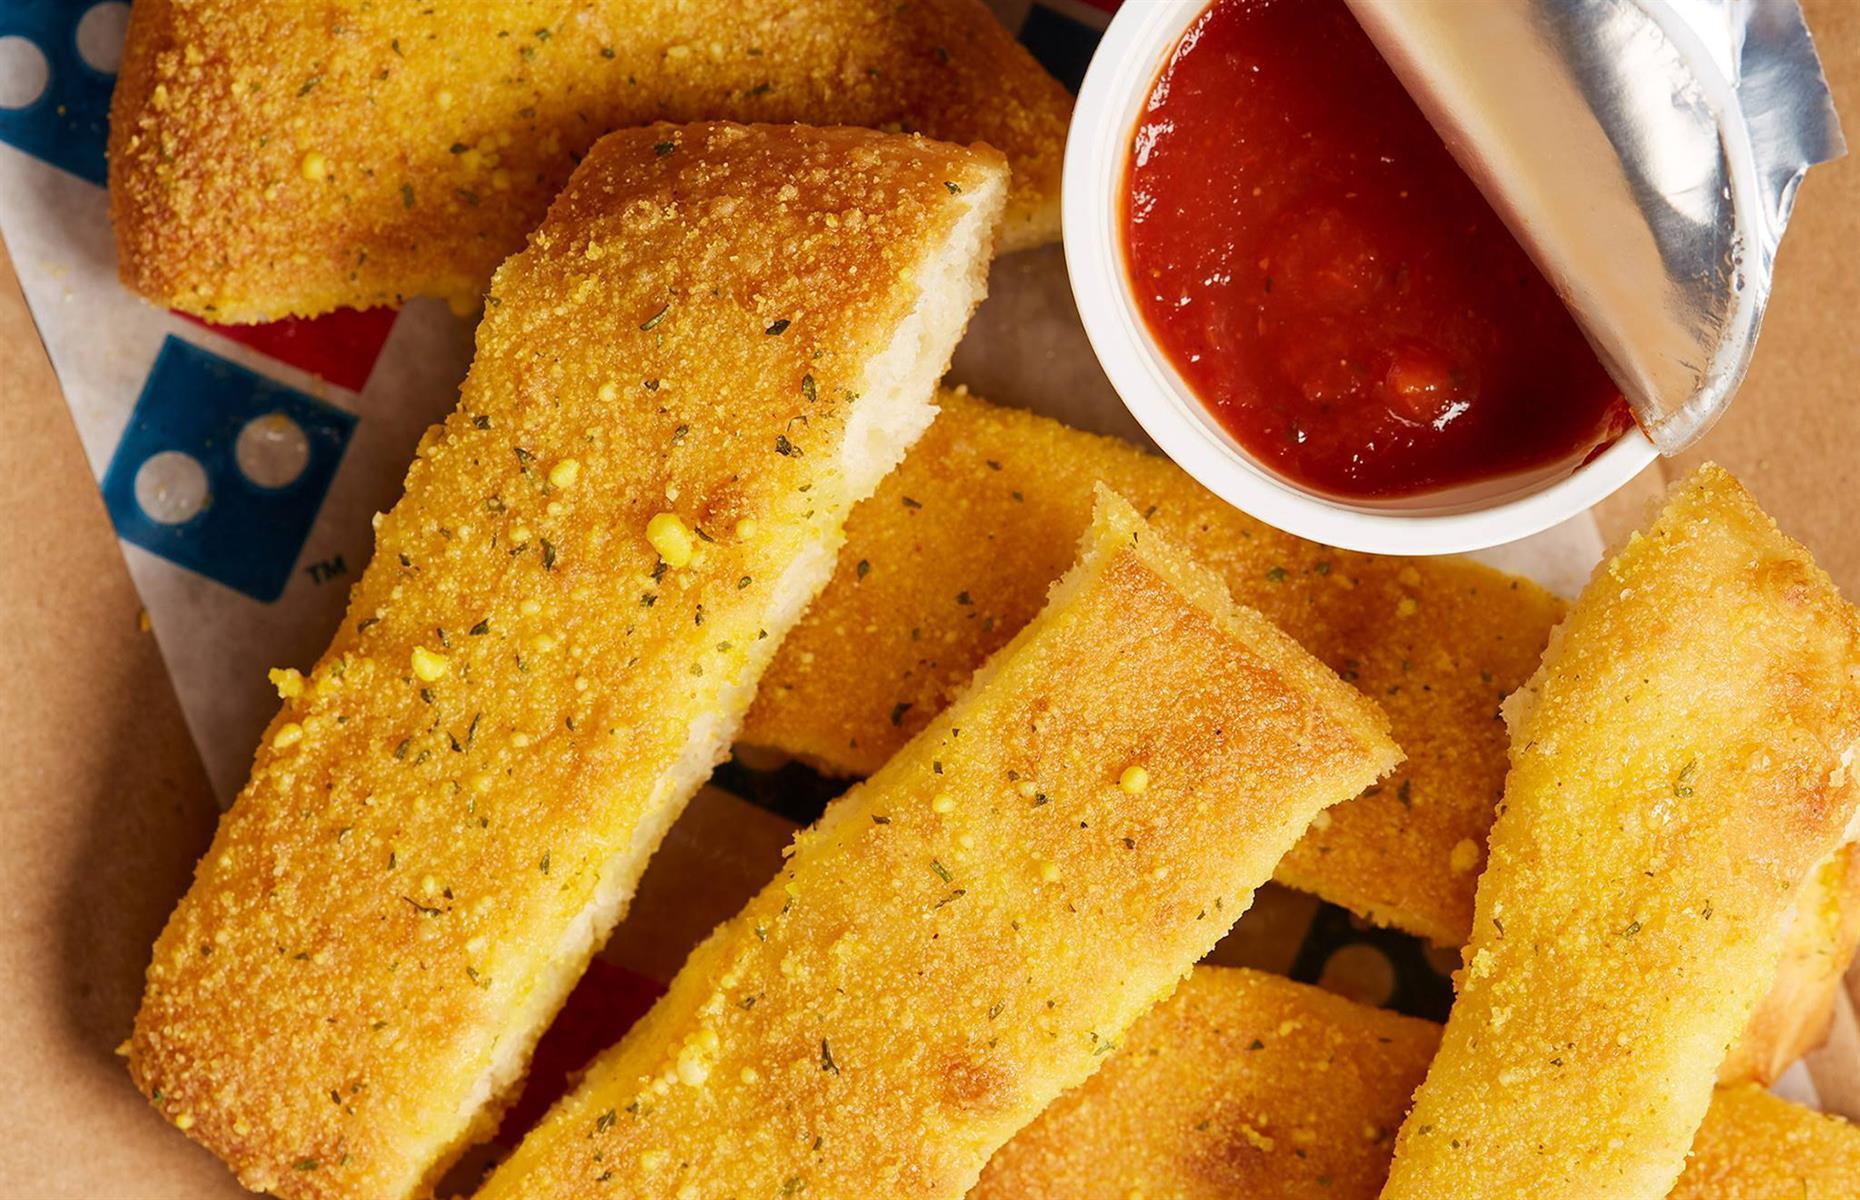 Parmesan and Pop-Tarts: 17 foods you've probably never frozen – but really  should, Food